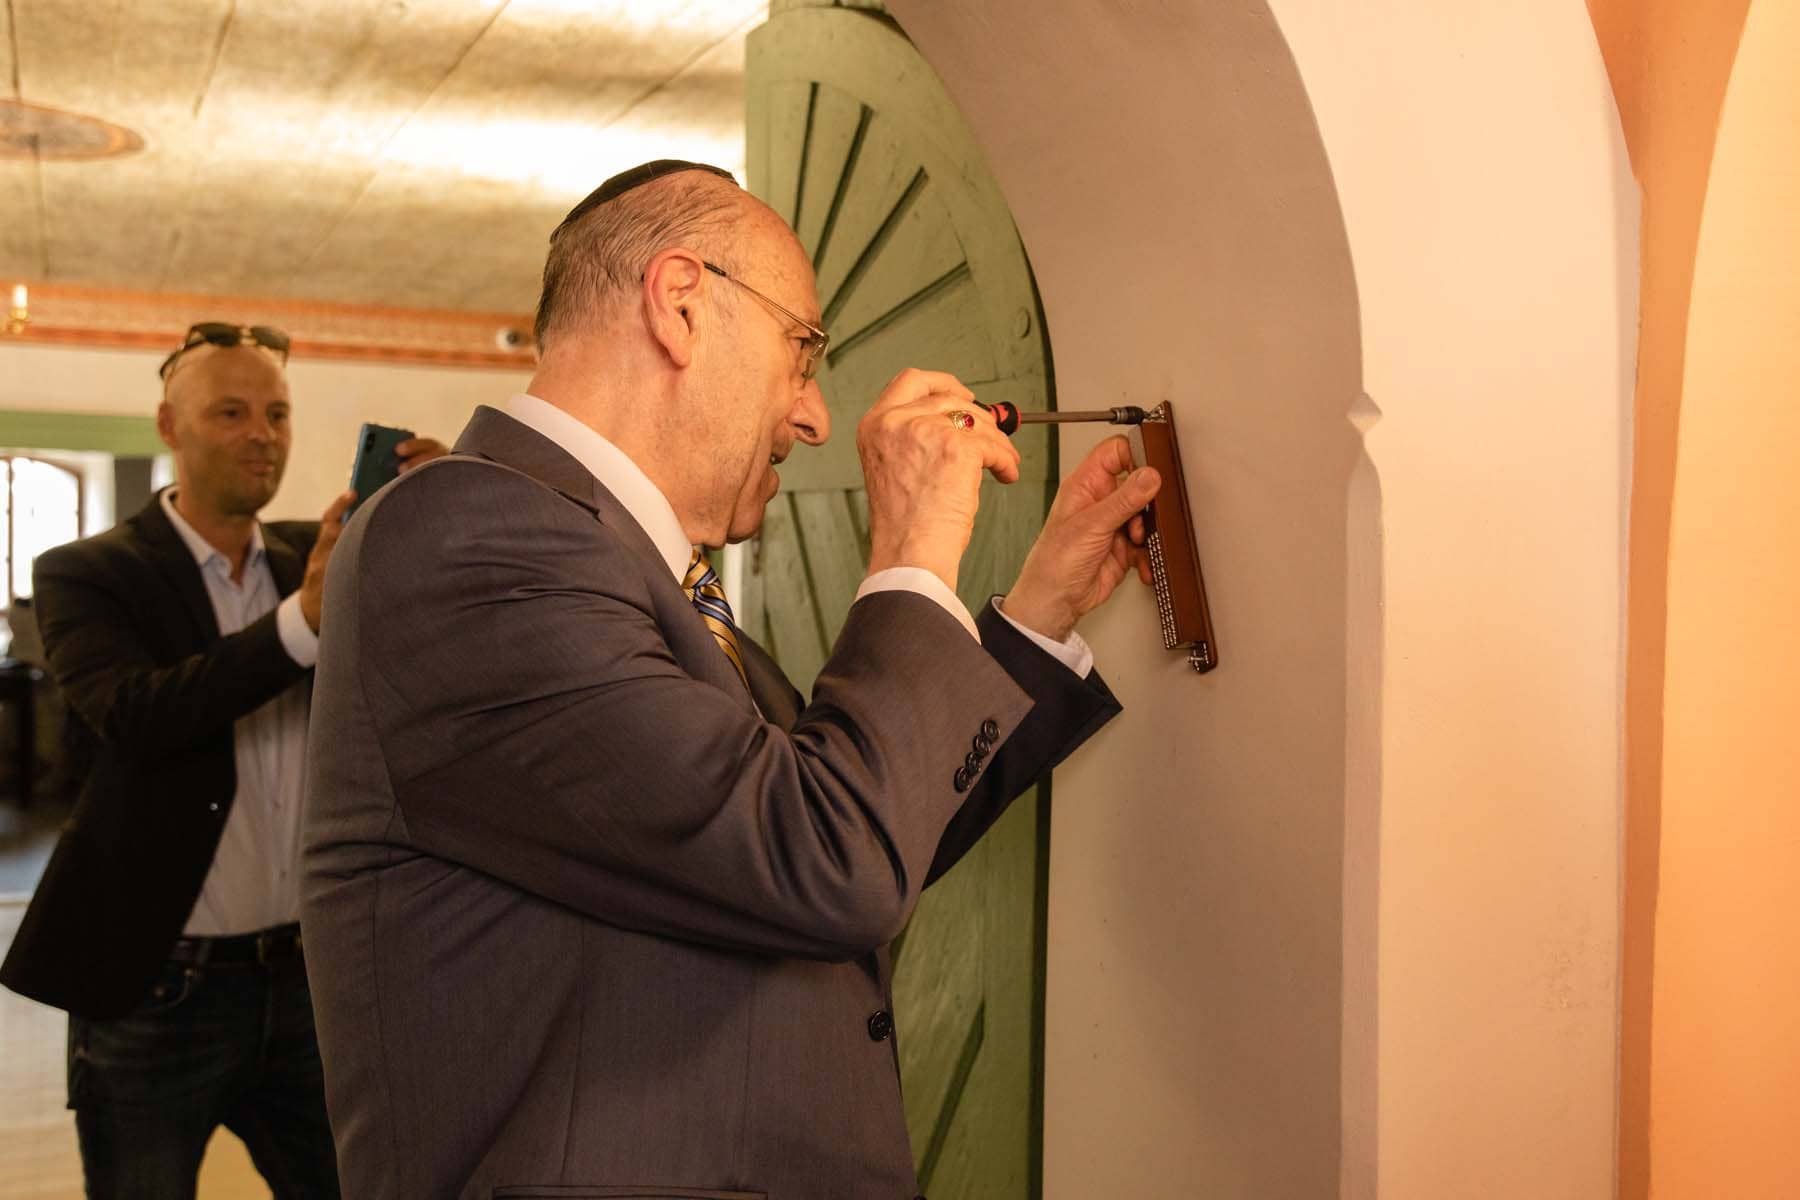 Mr. Emil Fish, together with Mr. Paul Packer and representatives of Jewish religious communities in Slovakia, attached a mezuzah to the doorpost of the entrance door